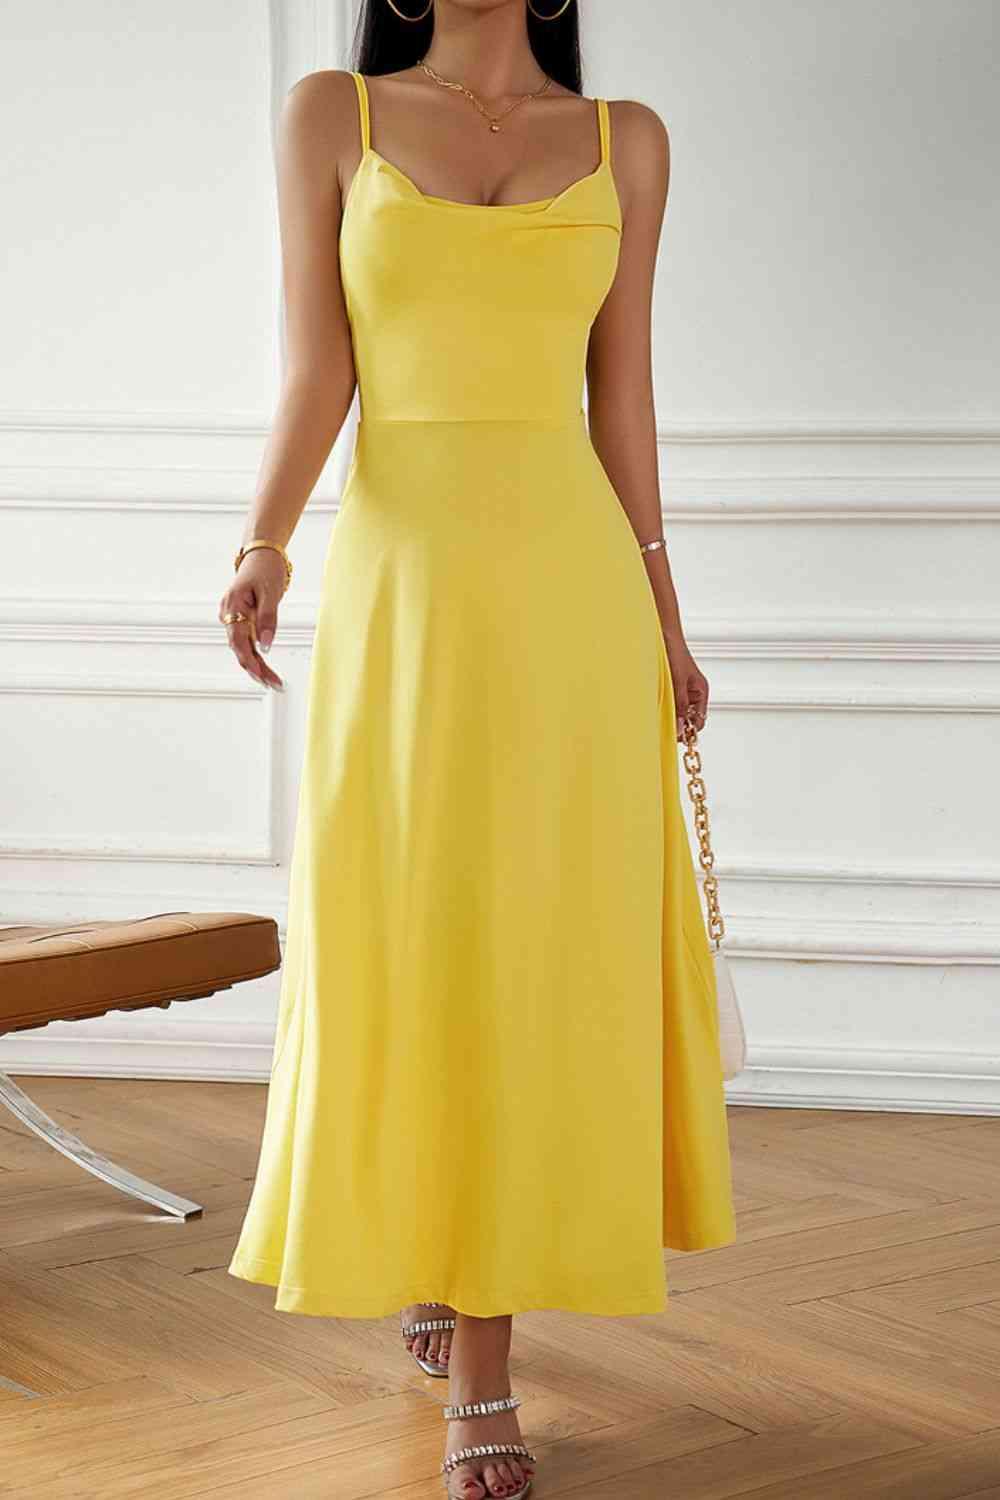 a woman in a yellow dress standing on a wooden floor